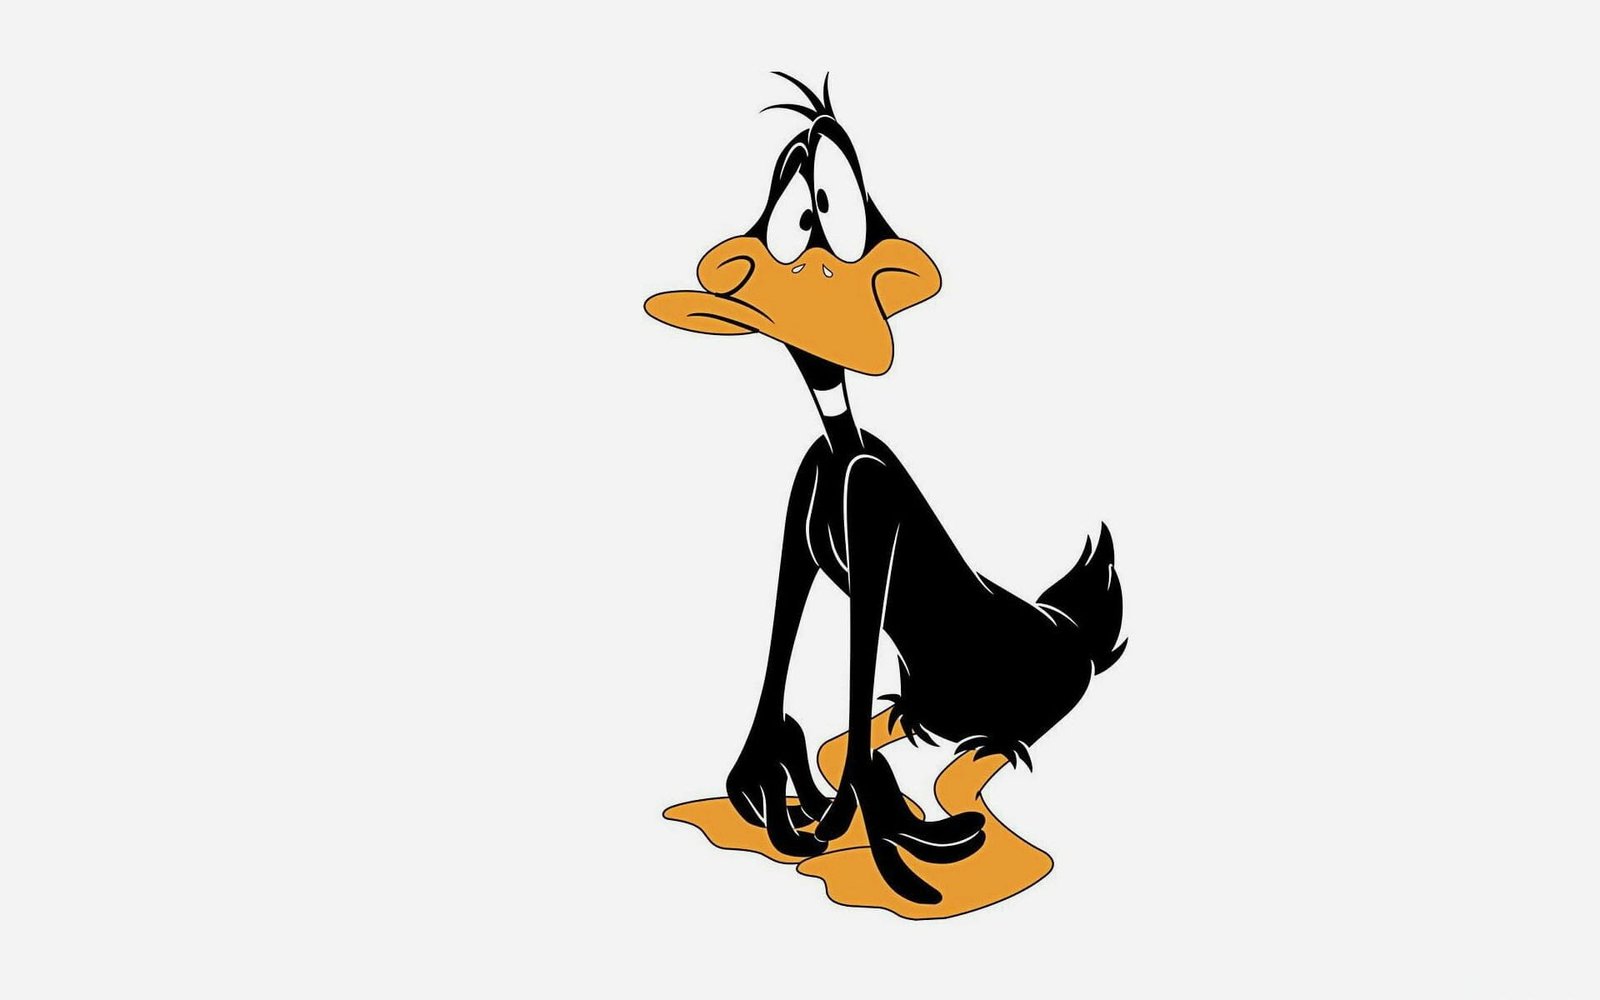 Looney tunes characters: Daffy Duck